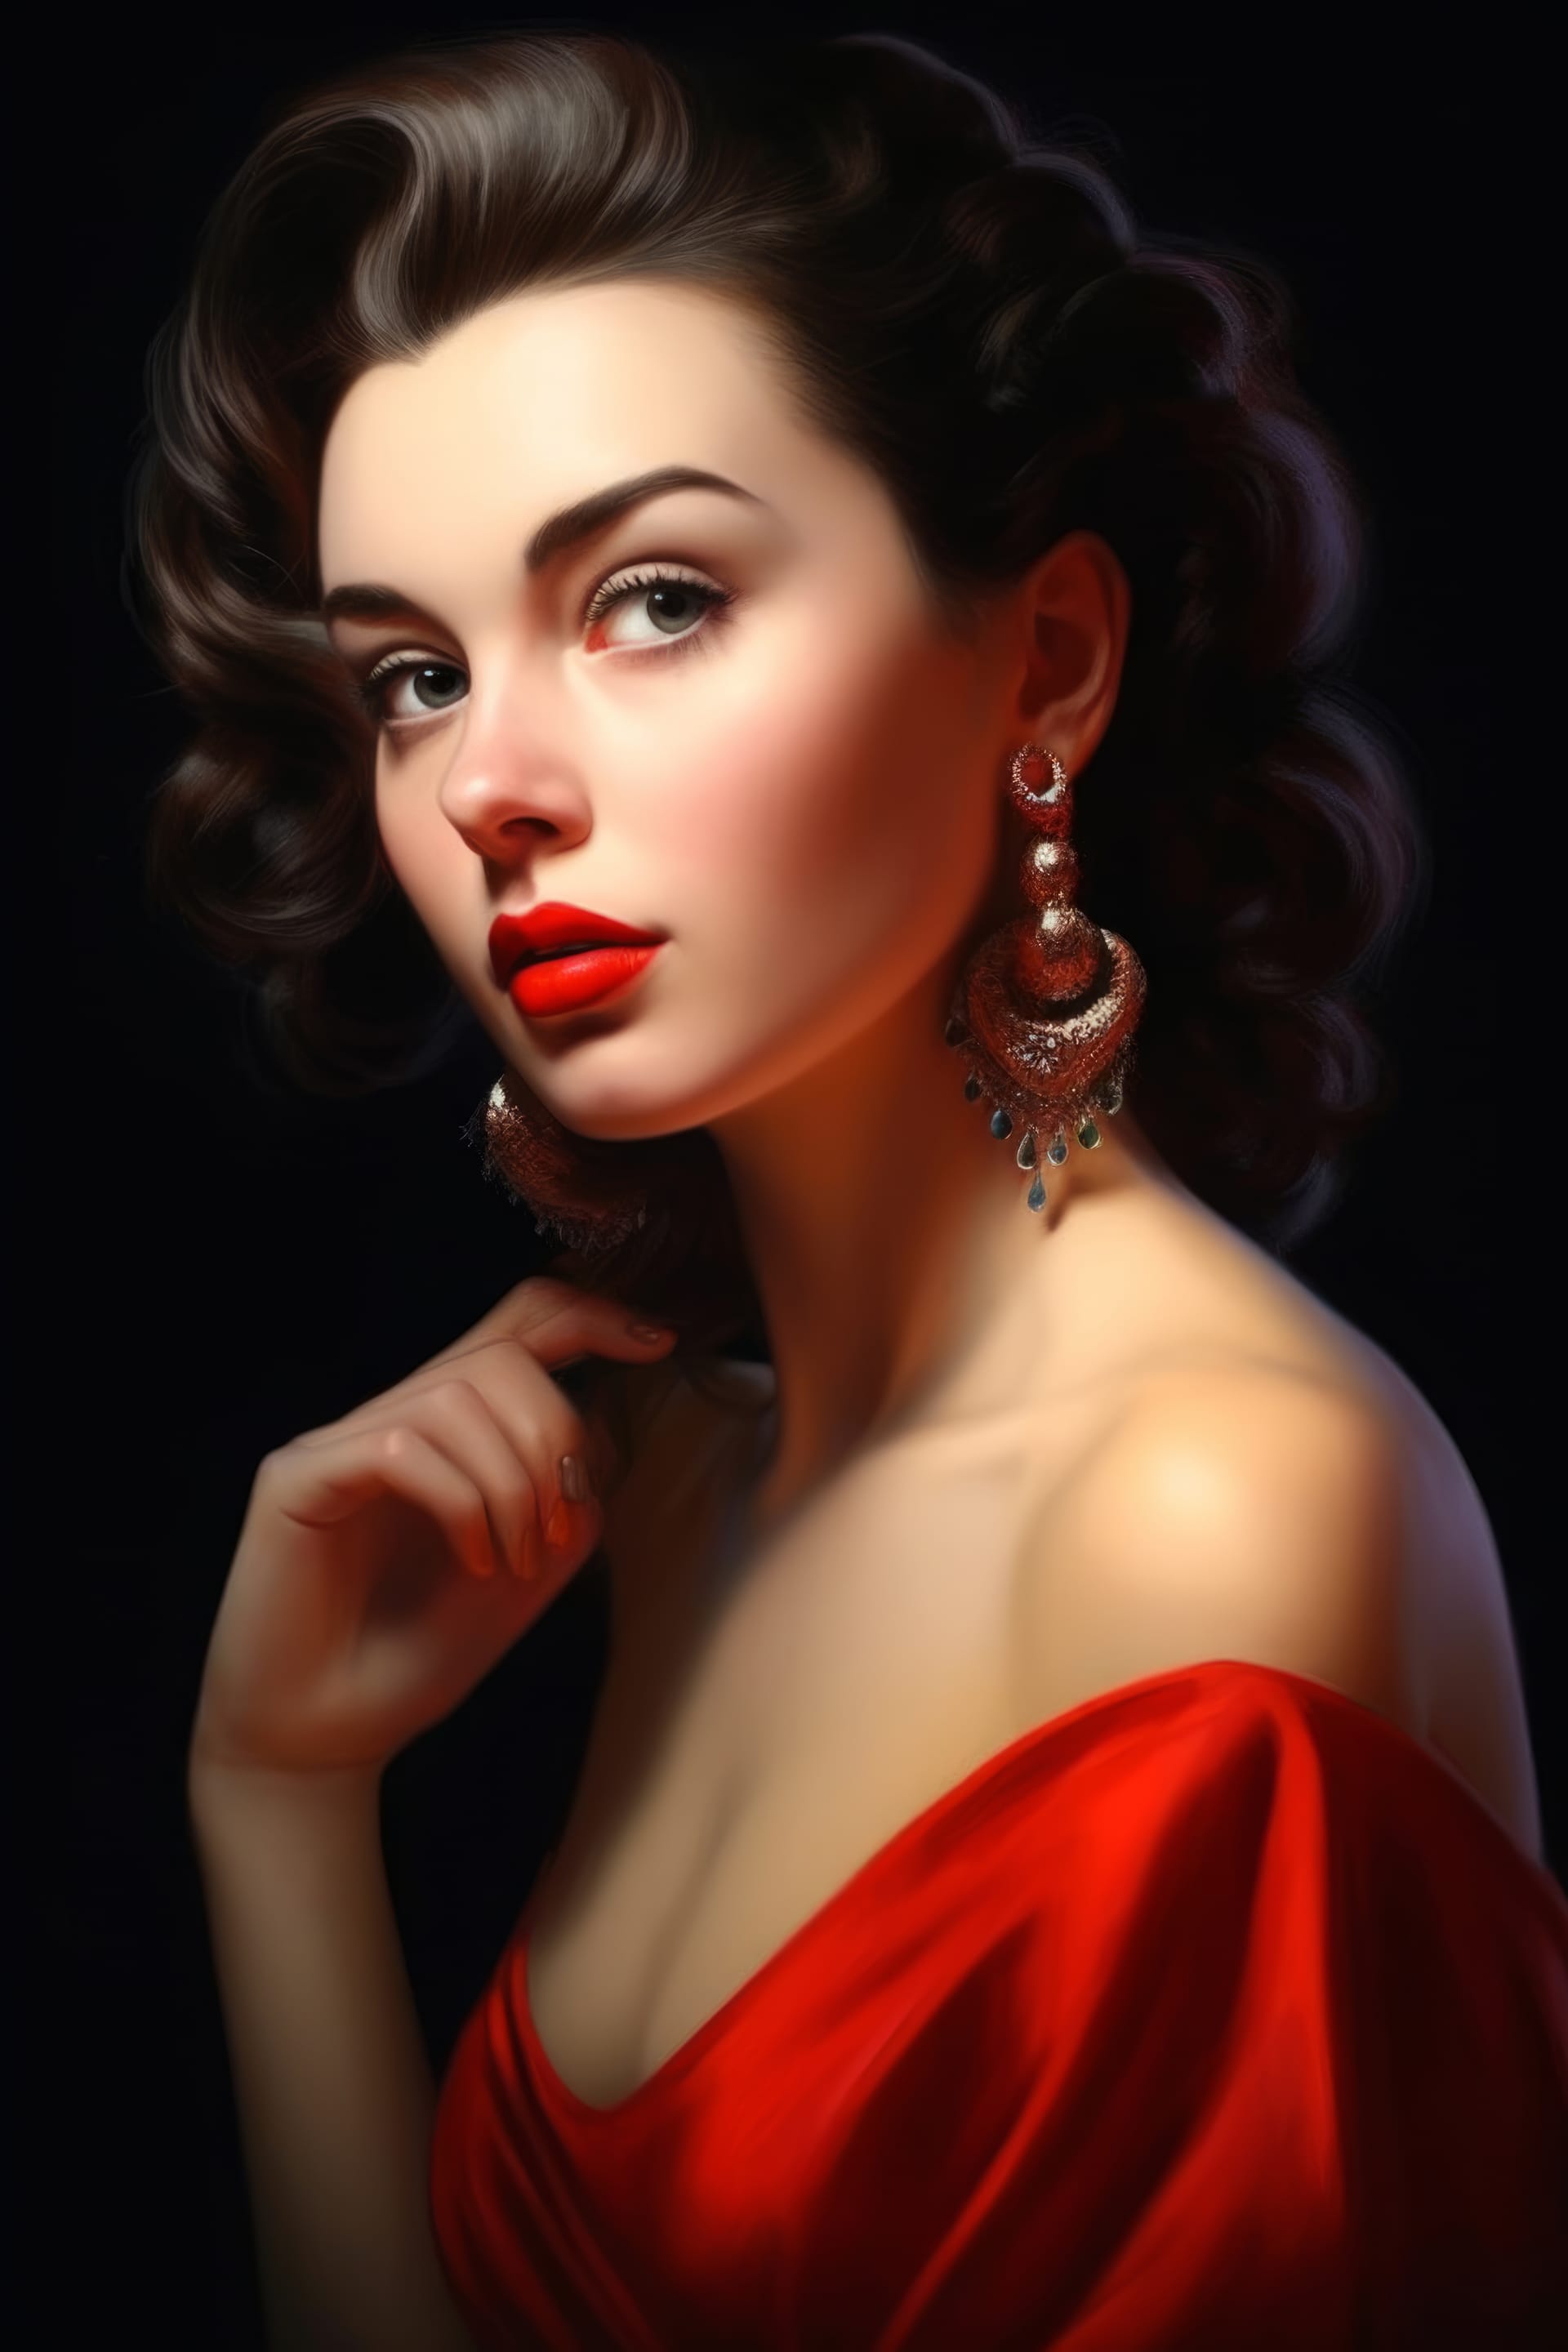 Beautiful young woman red dress best profile picture for facebook